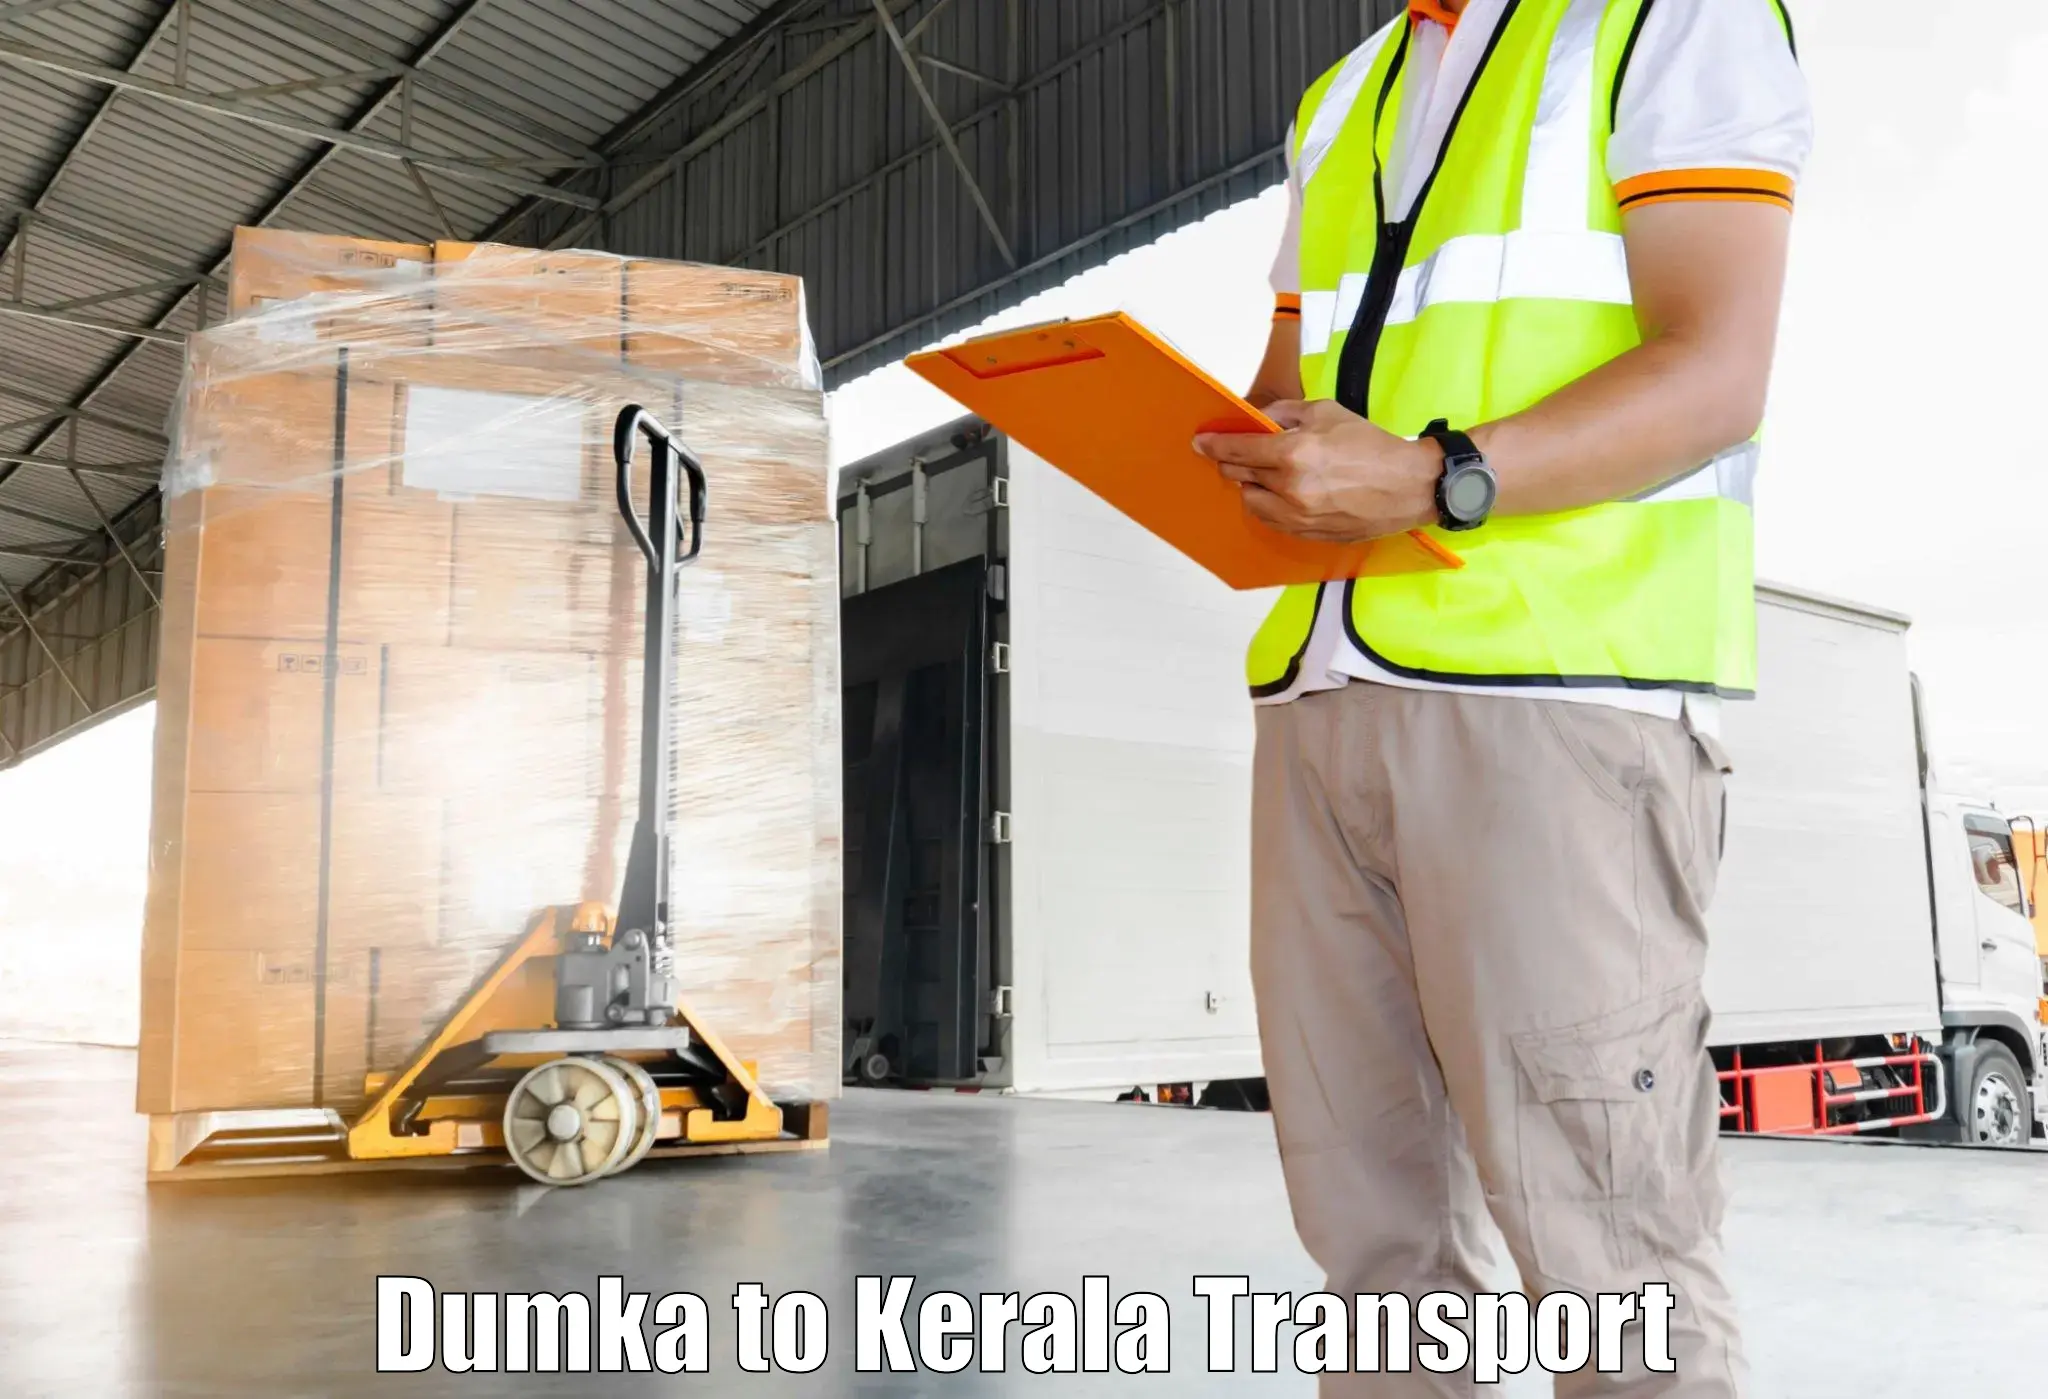 Express transport services Dumka to Cochin University of Science and Technology